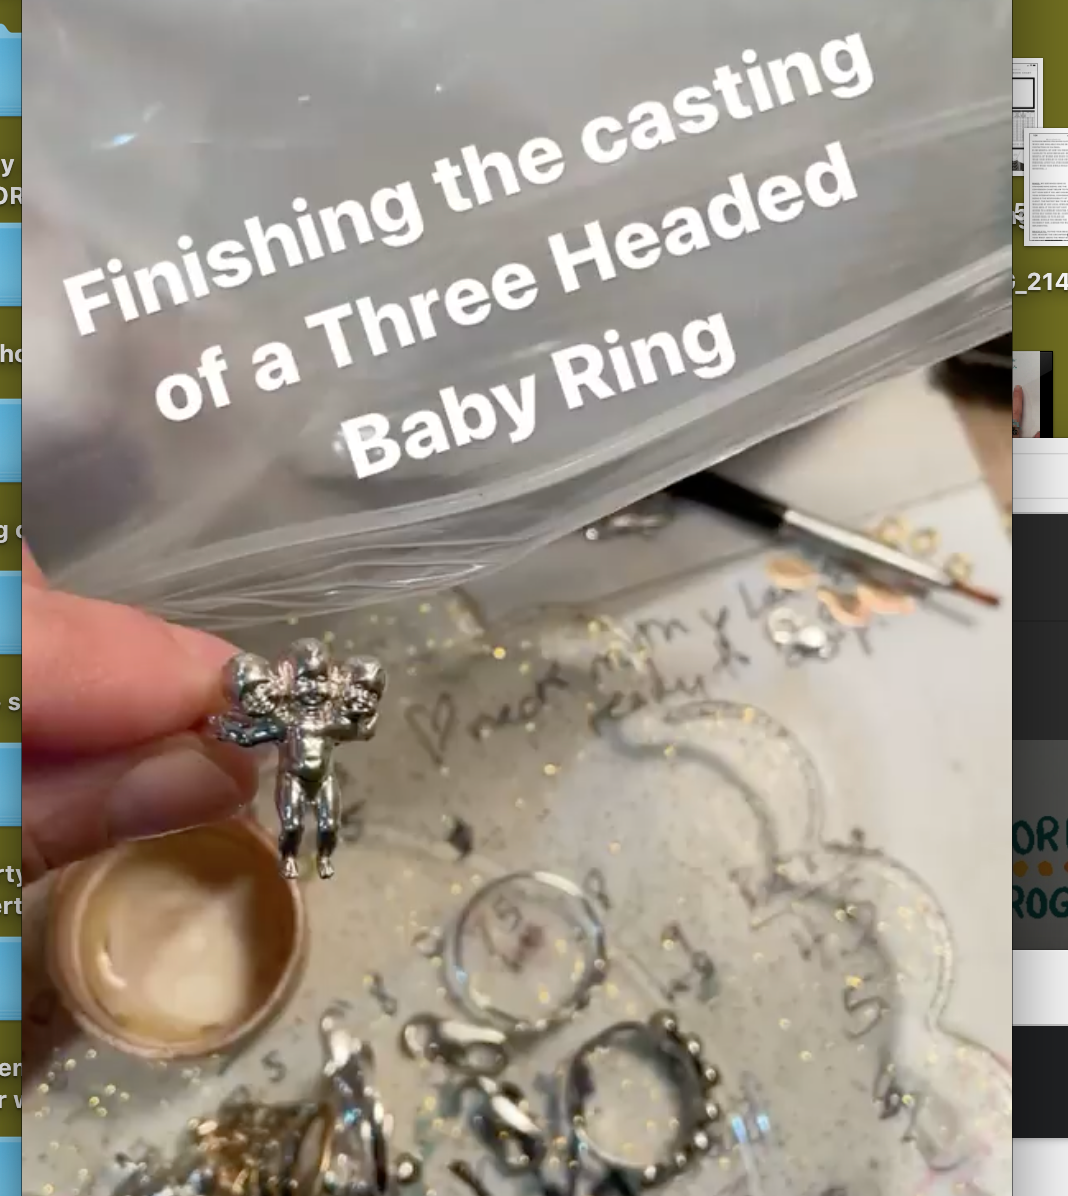 Jewelry making process video: Finishing of the Final Castings